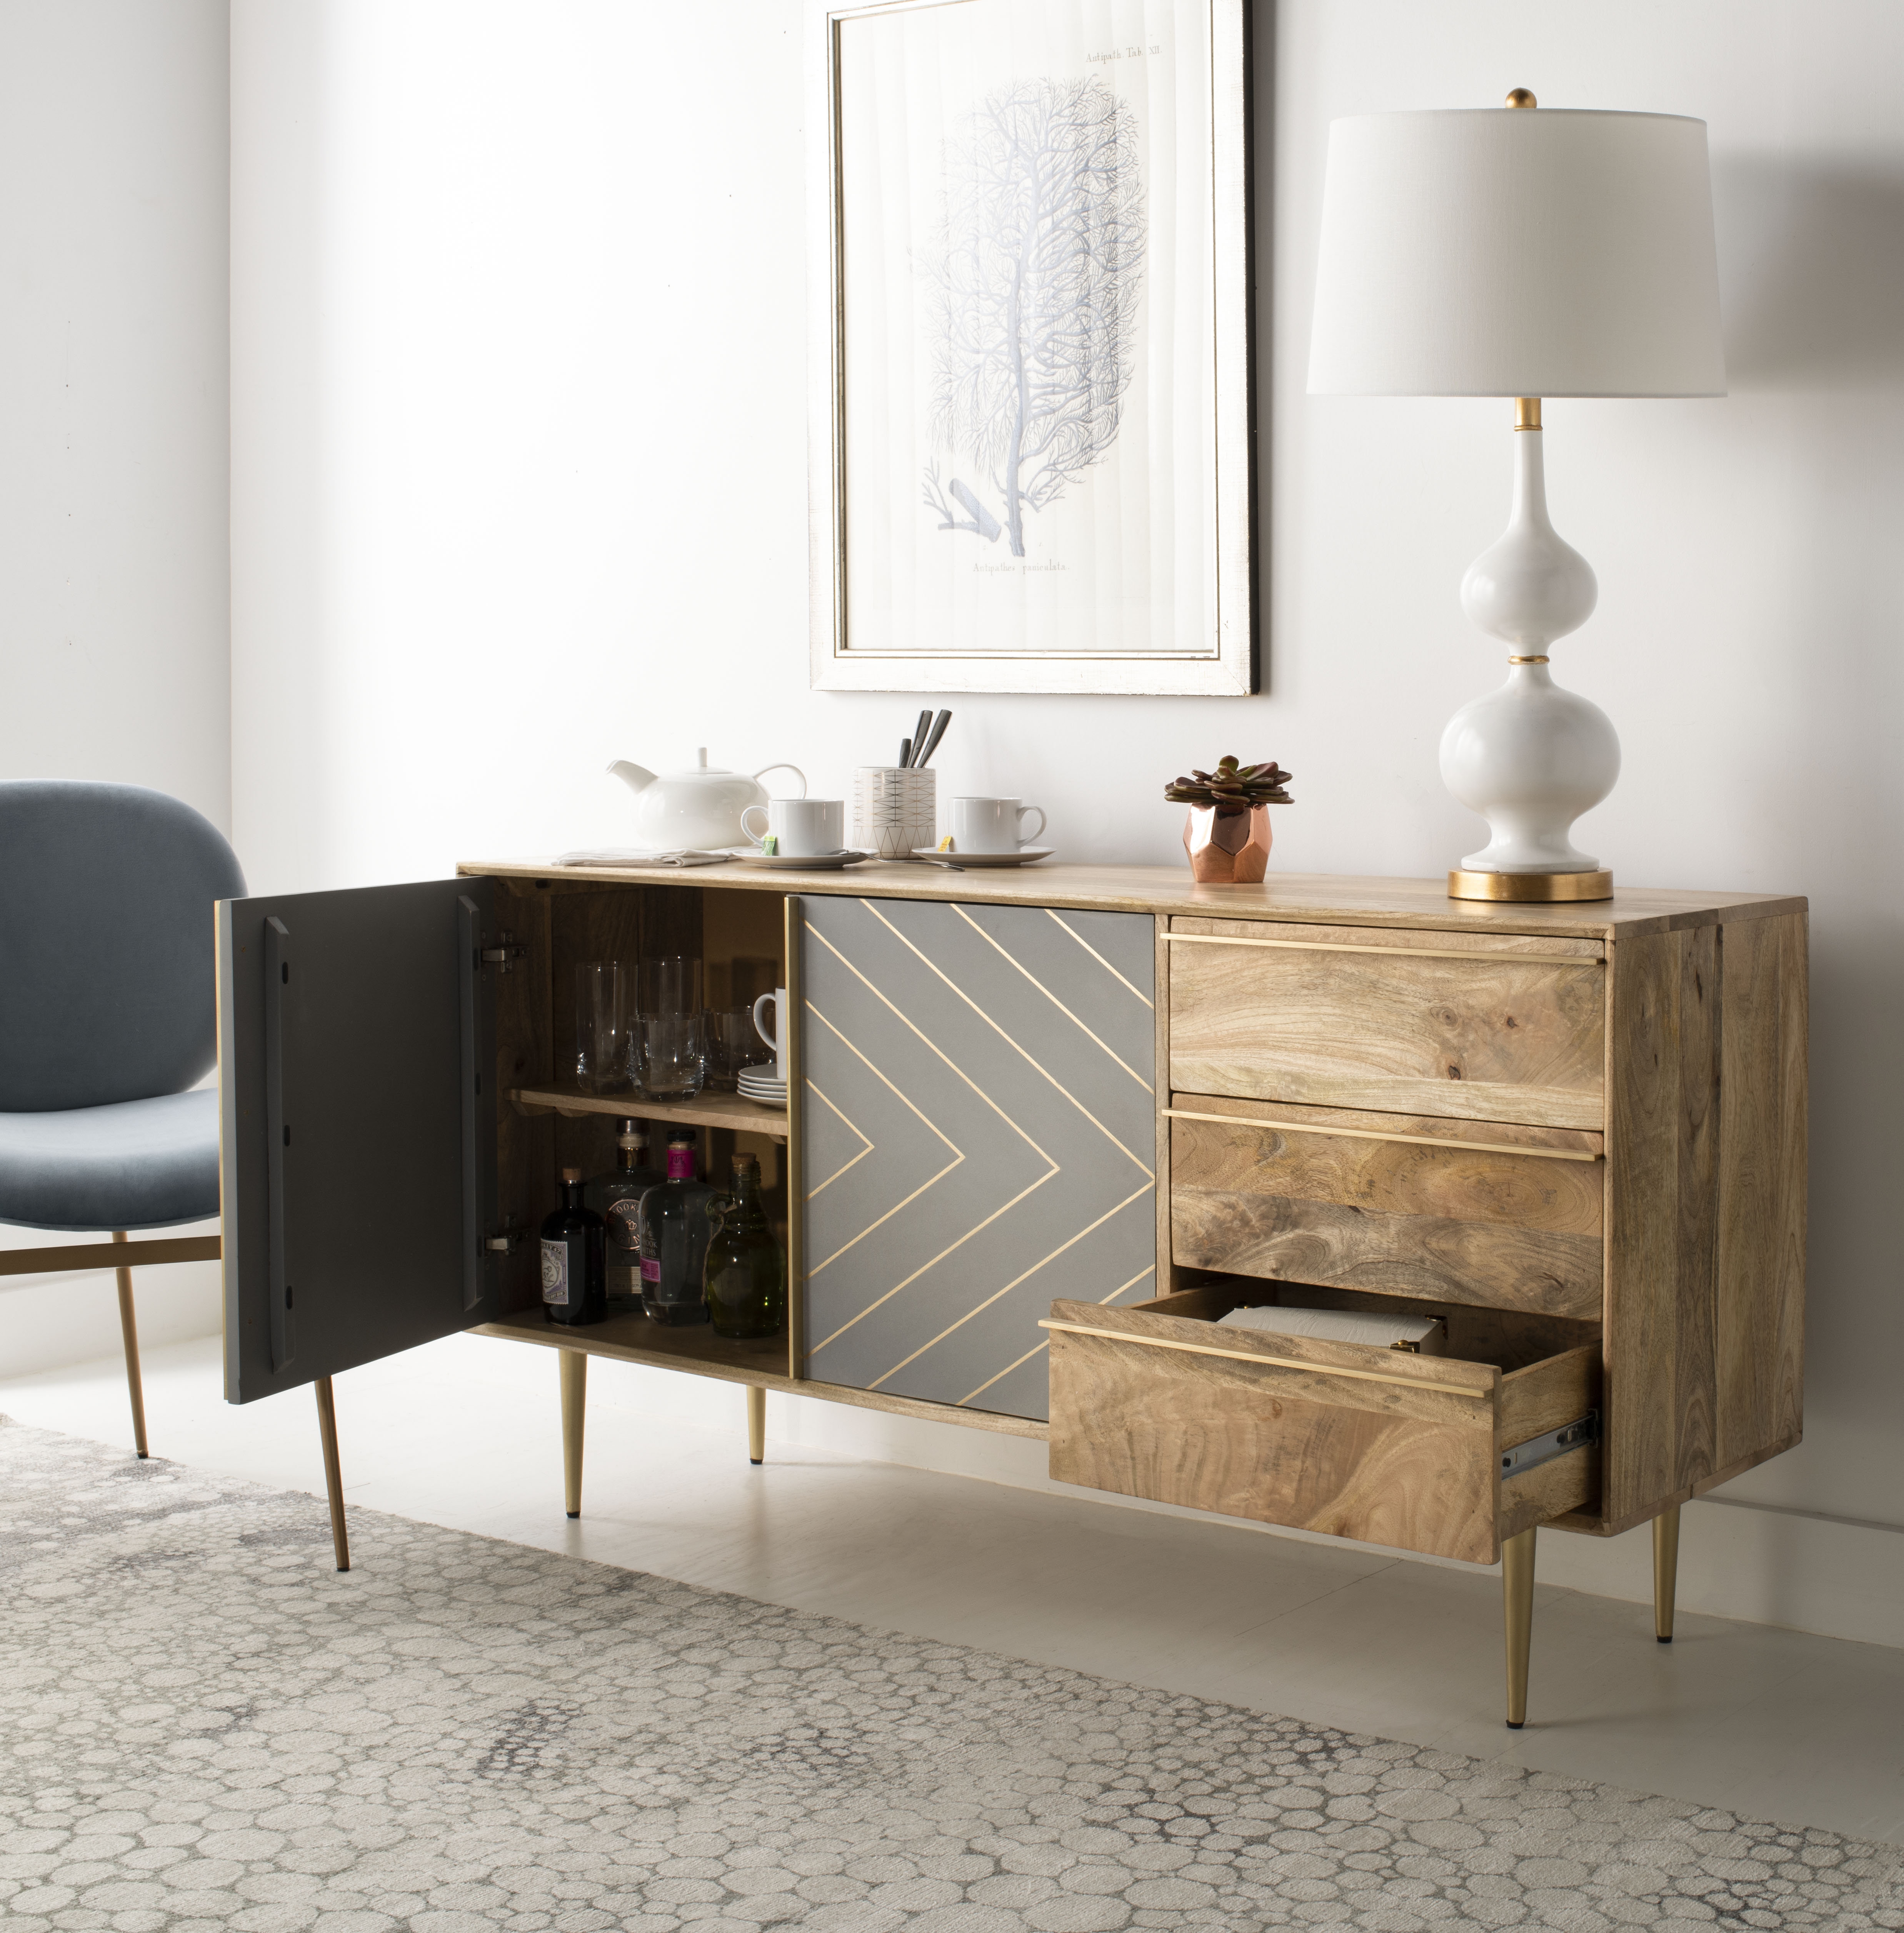 Titan Gold Inlayed Cement Sideboard - Natural Mango/Brass/Cement - Arlo Home - Image 8